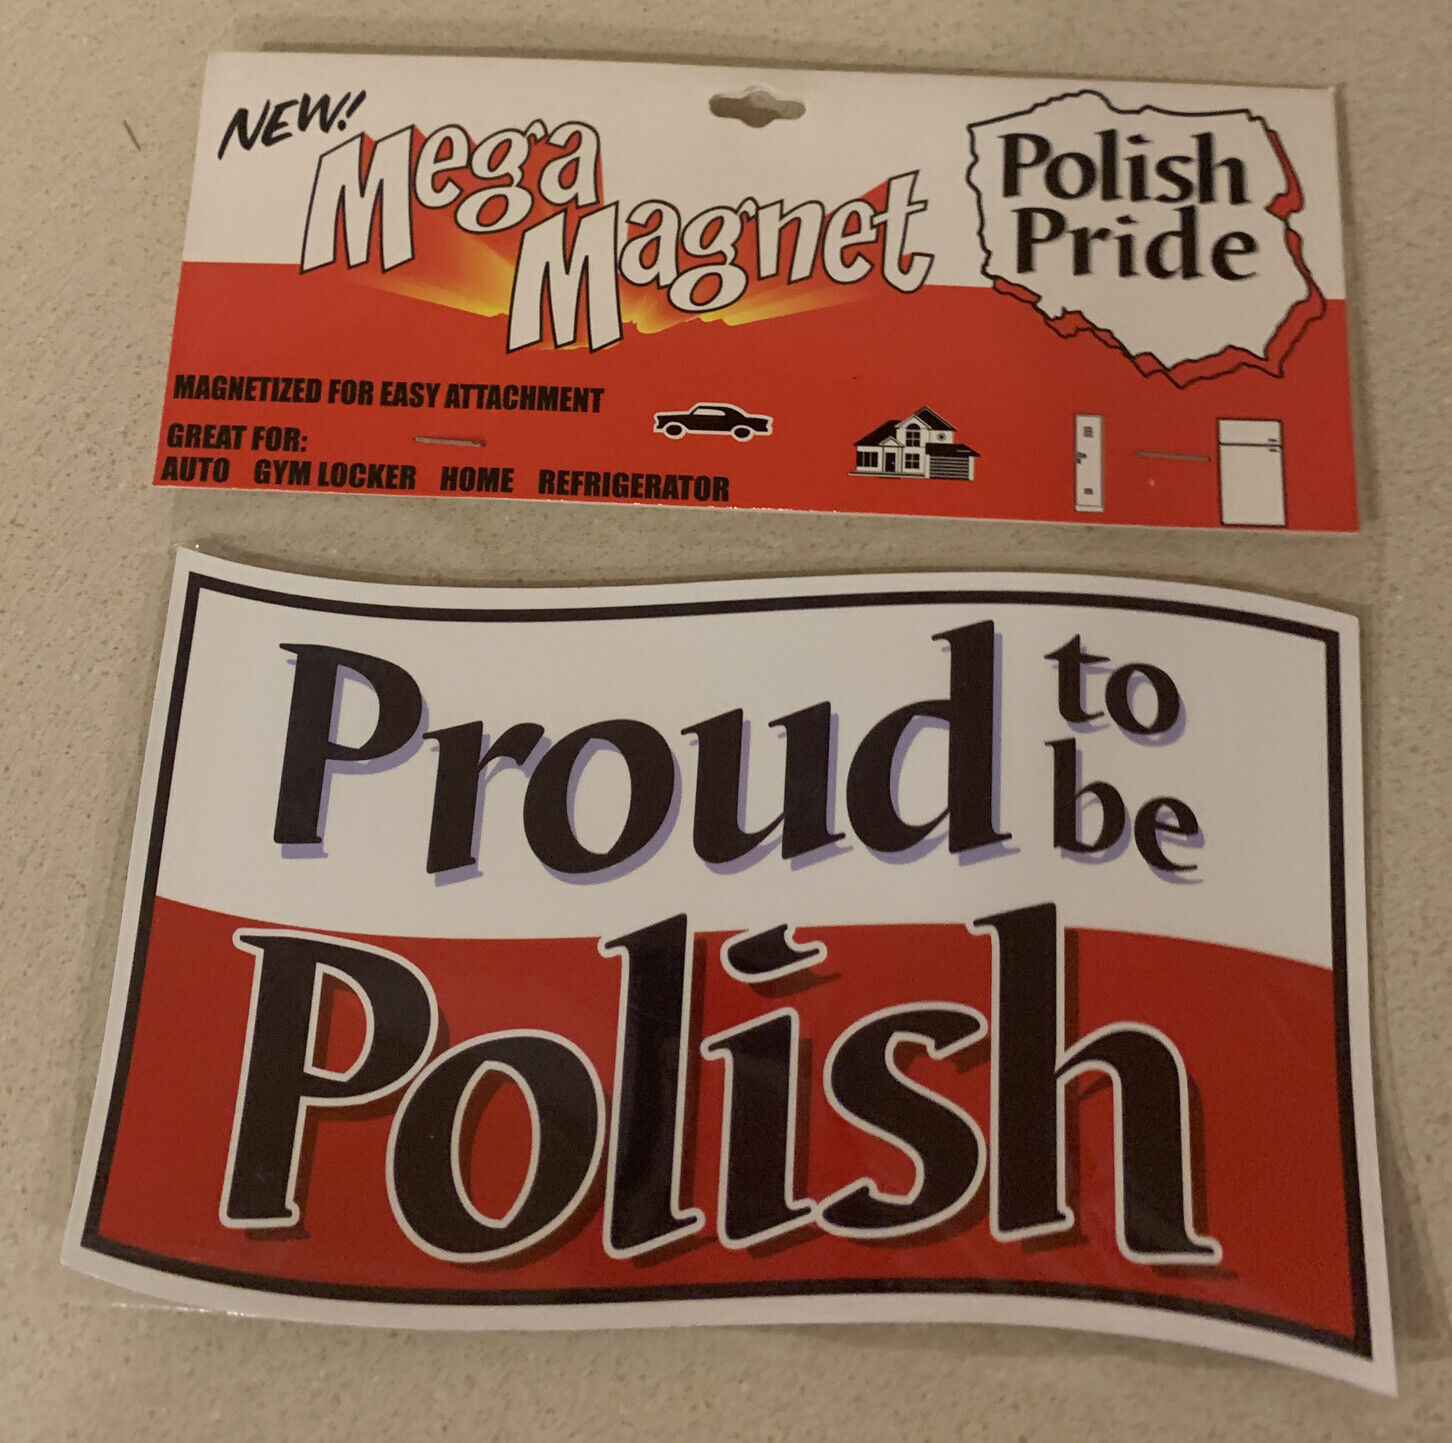 Proud to be Polish Car Auto Refrigerator Magnet (7.75 inches by 4.75 inches) NEW